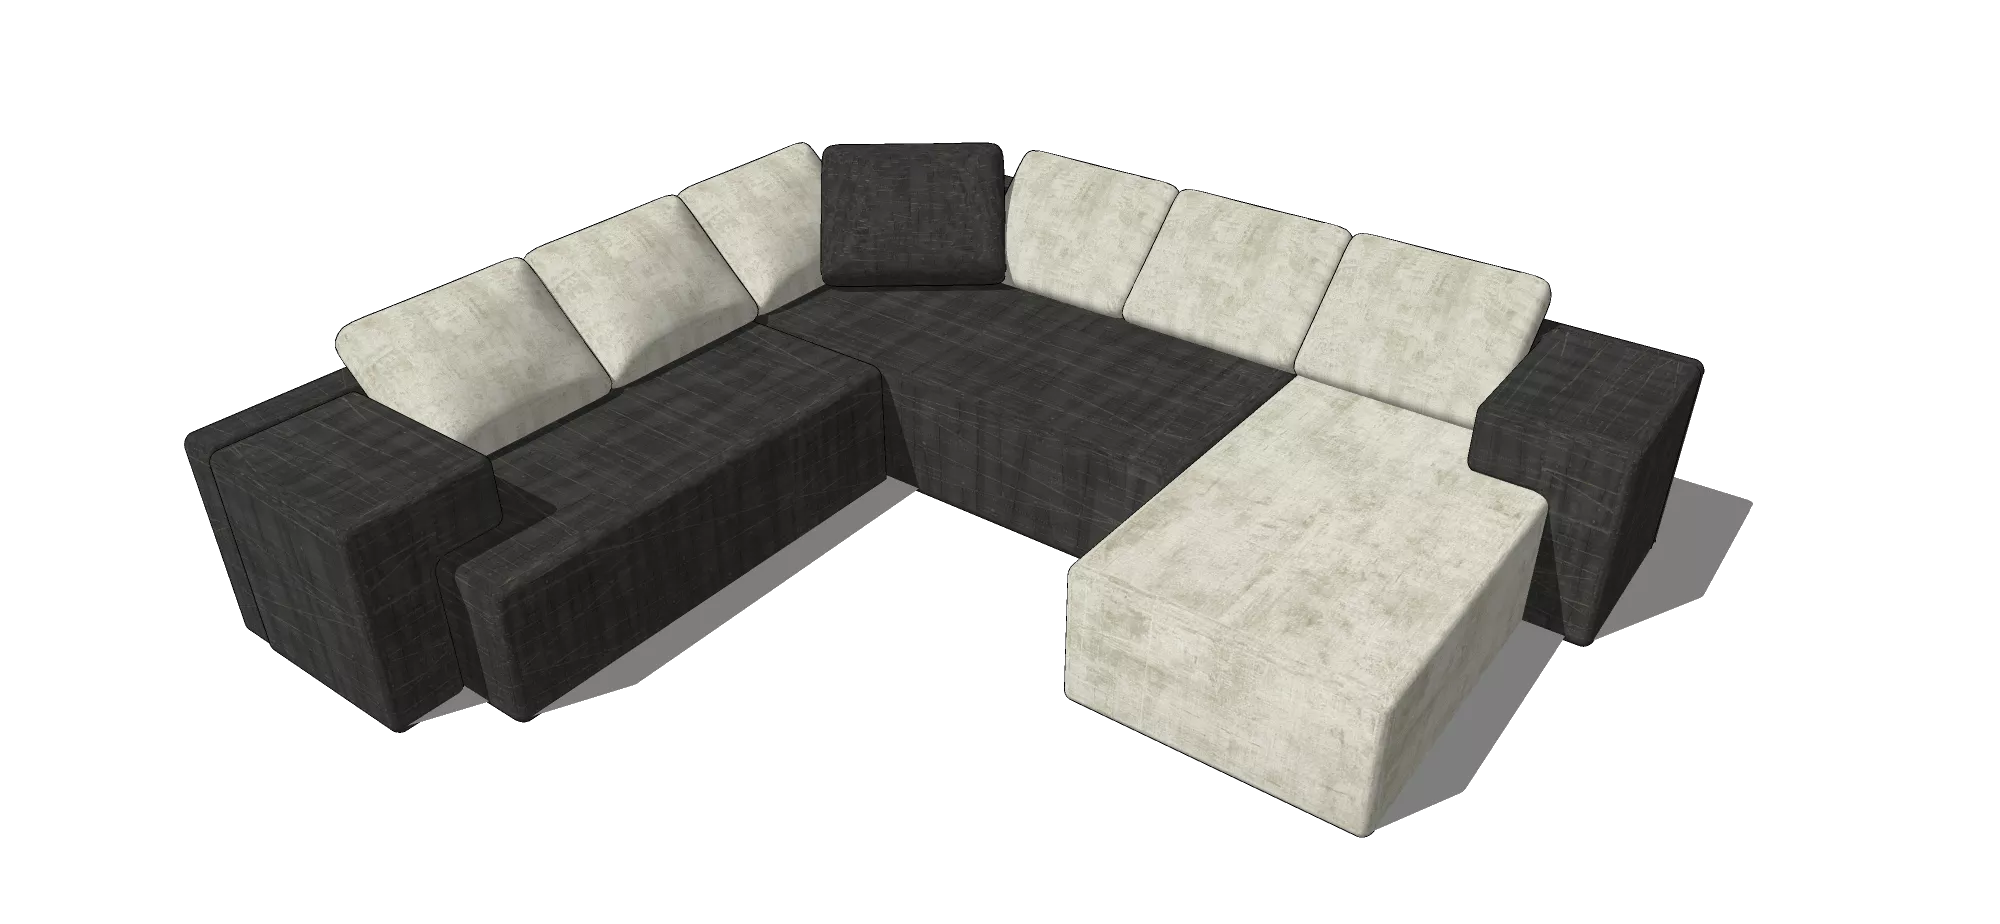 MODERN SOFA - SKETCHUP 3D MODEL - VRAY OR ENSCAPE - ID13080